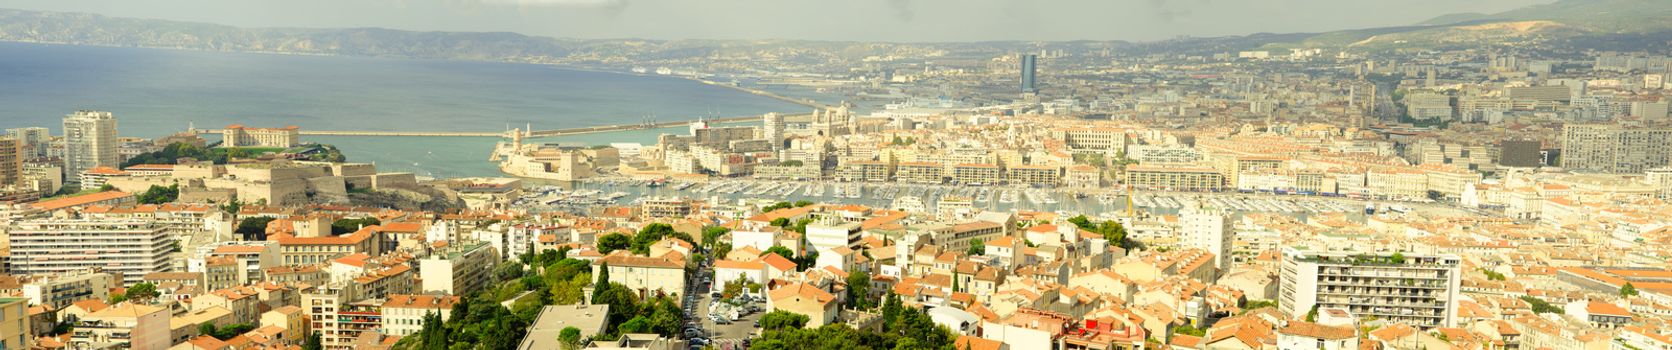 Panoramic view of the Vieux Port (the old port) area in Marseilles, France